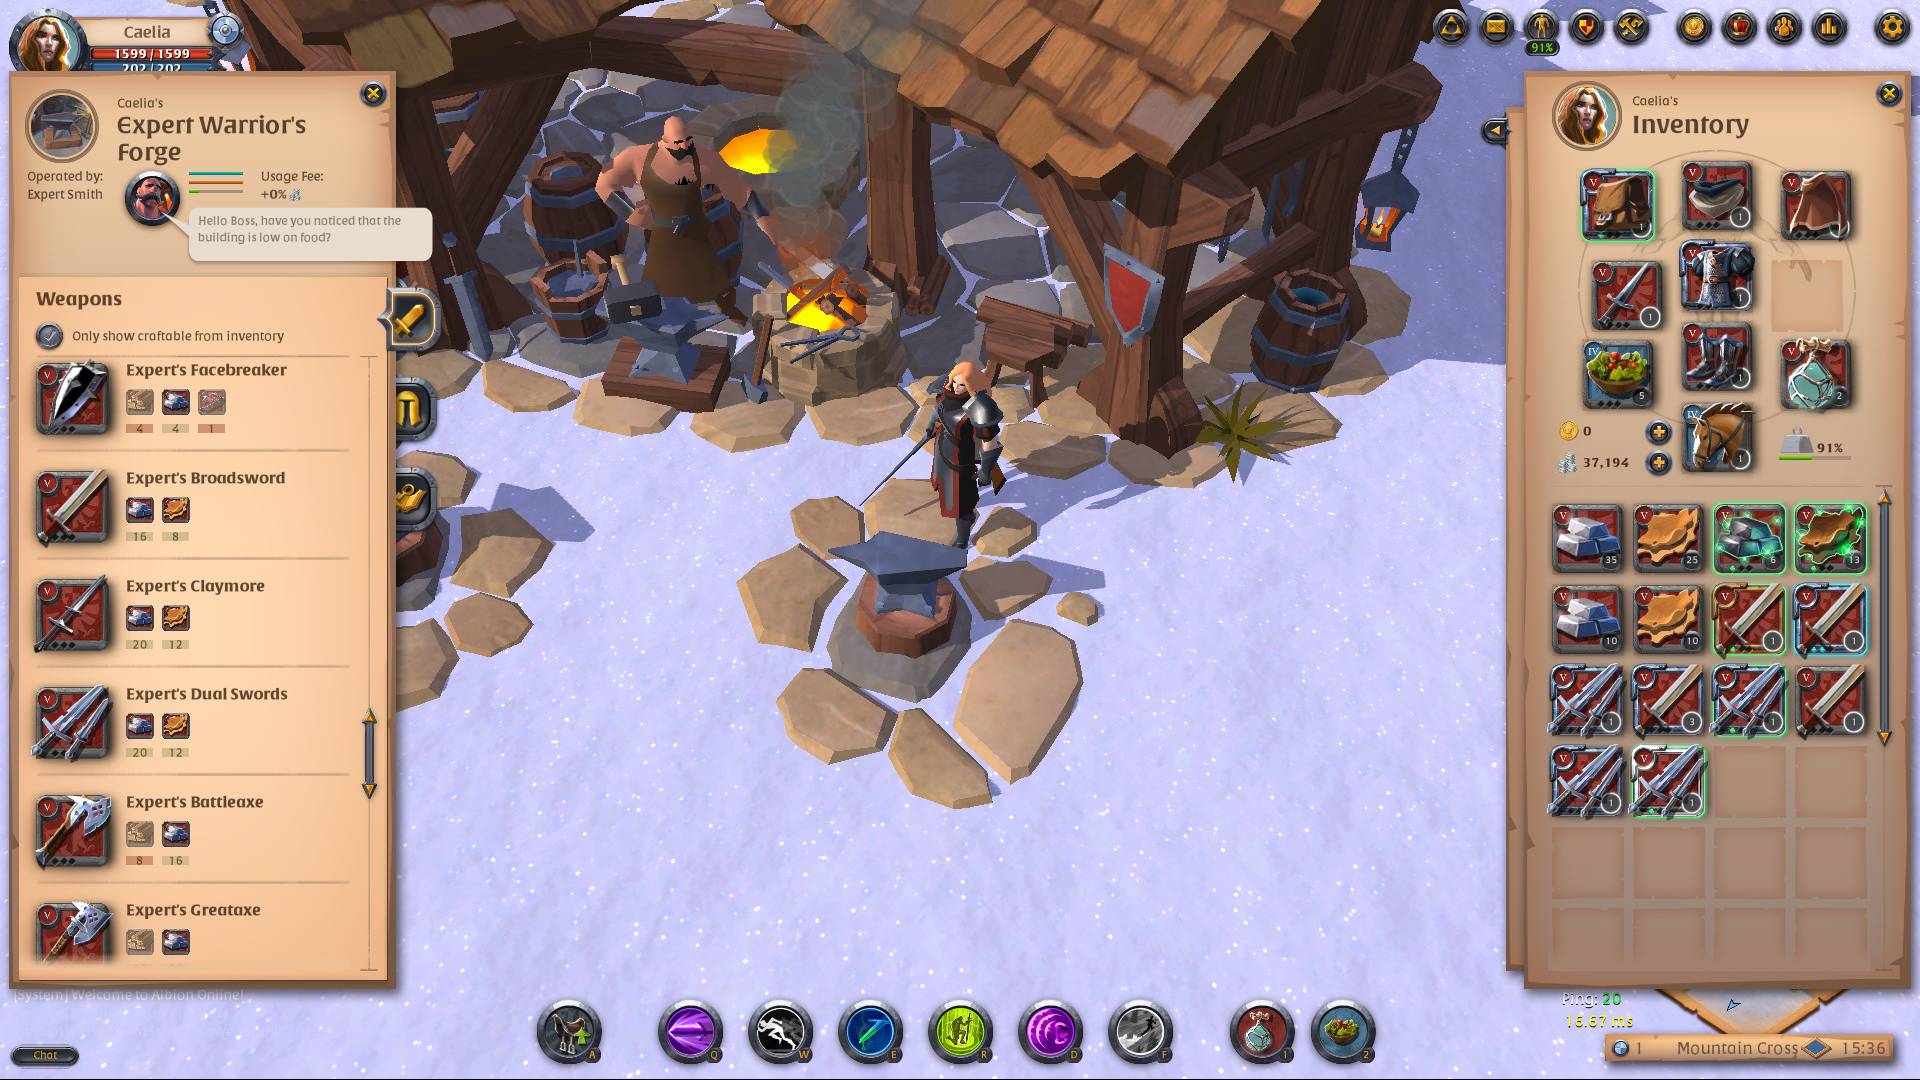 Best free PC games: Albion Online. Image shows a character standing outside a house on a snowy day, with lots of the game's UI visible.